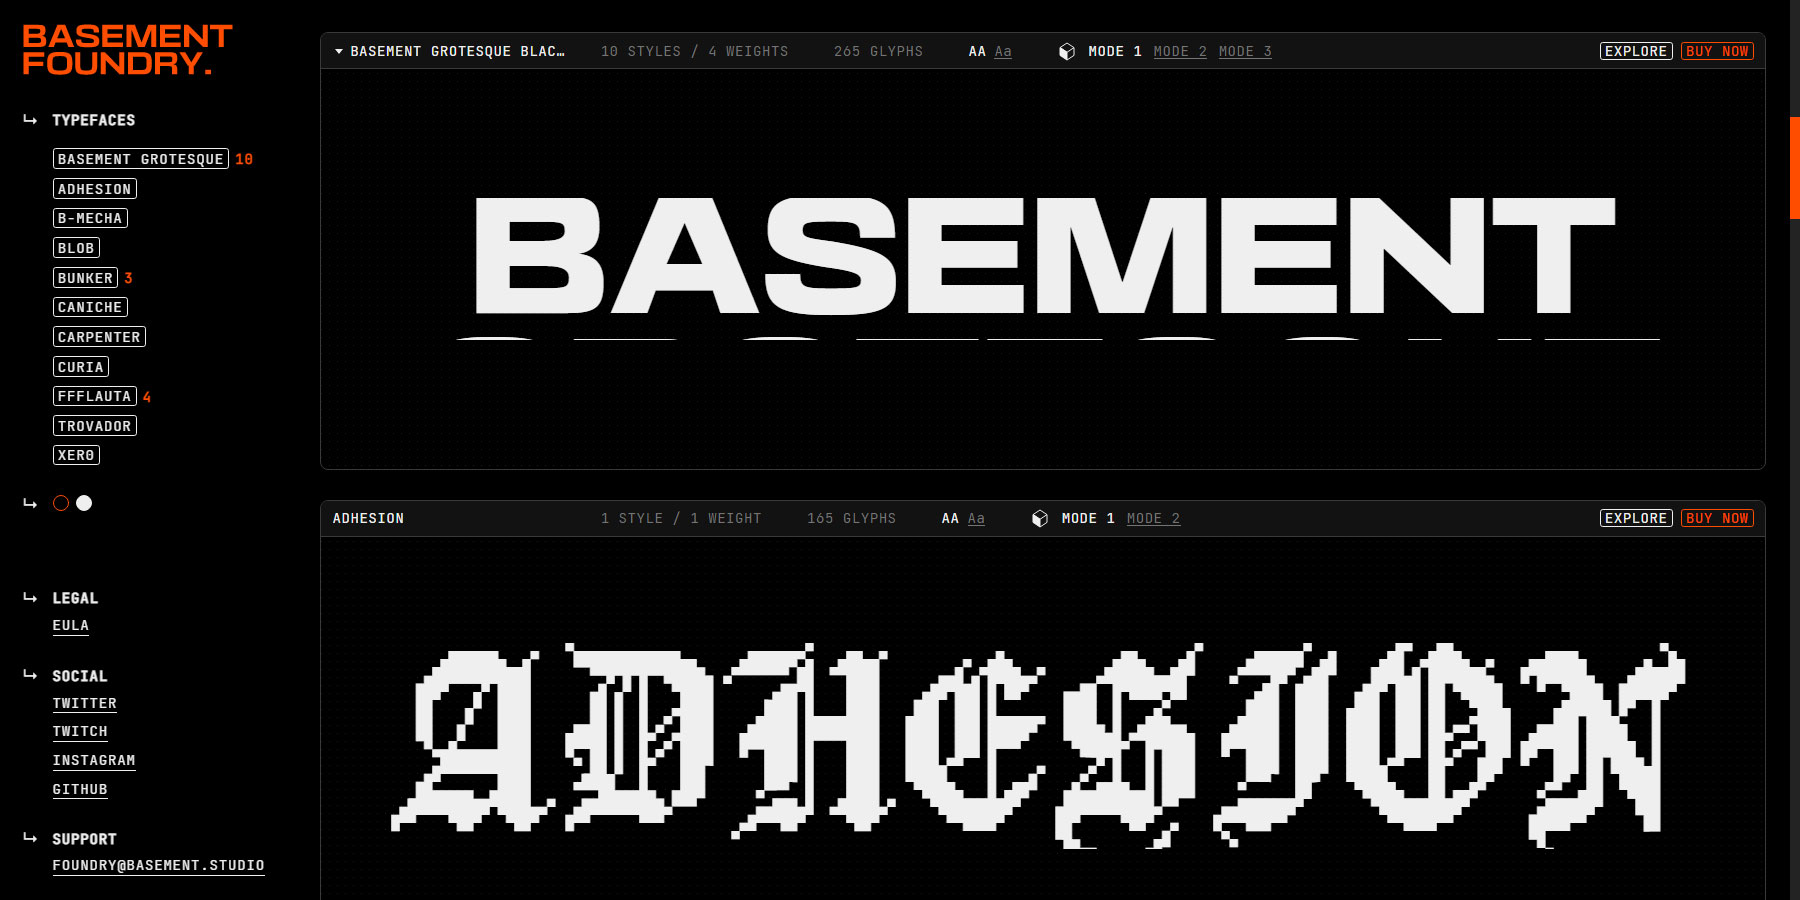 BASEMENT FOUNDRY - Website of the Day